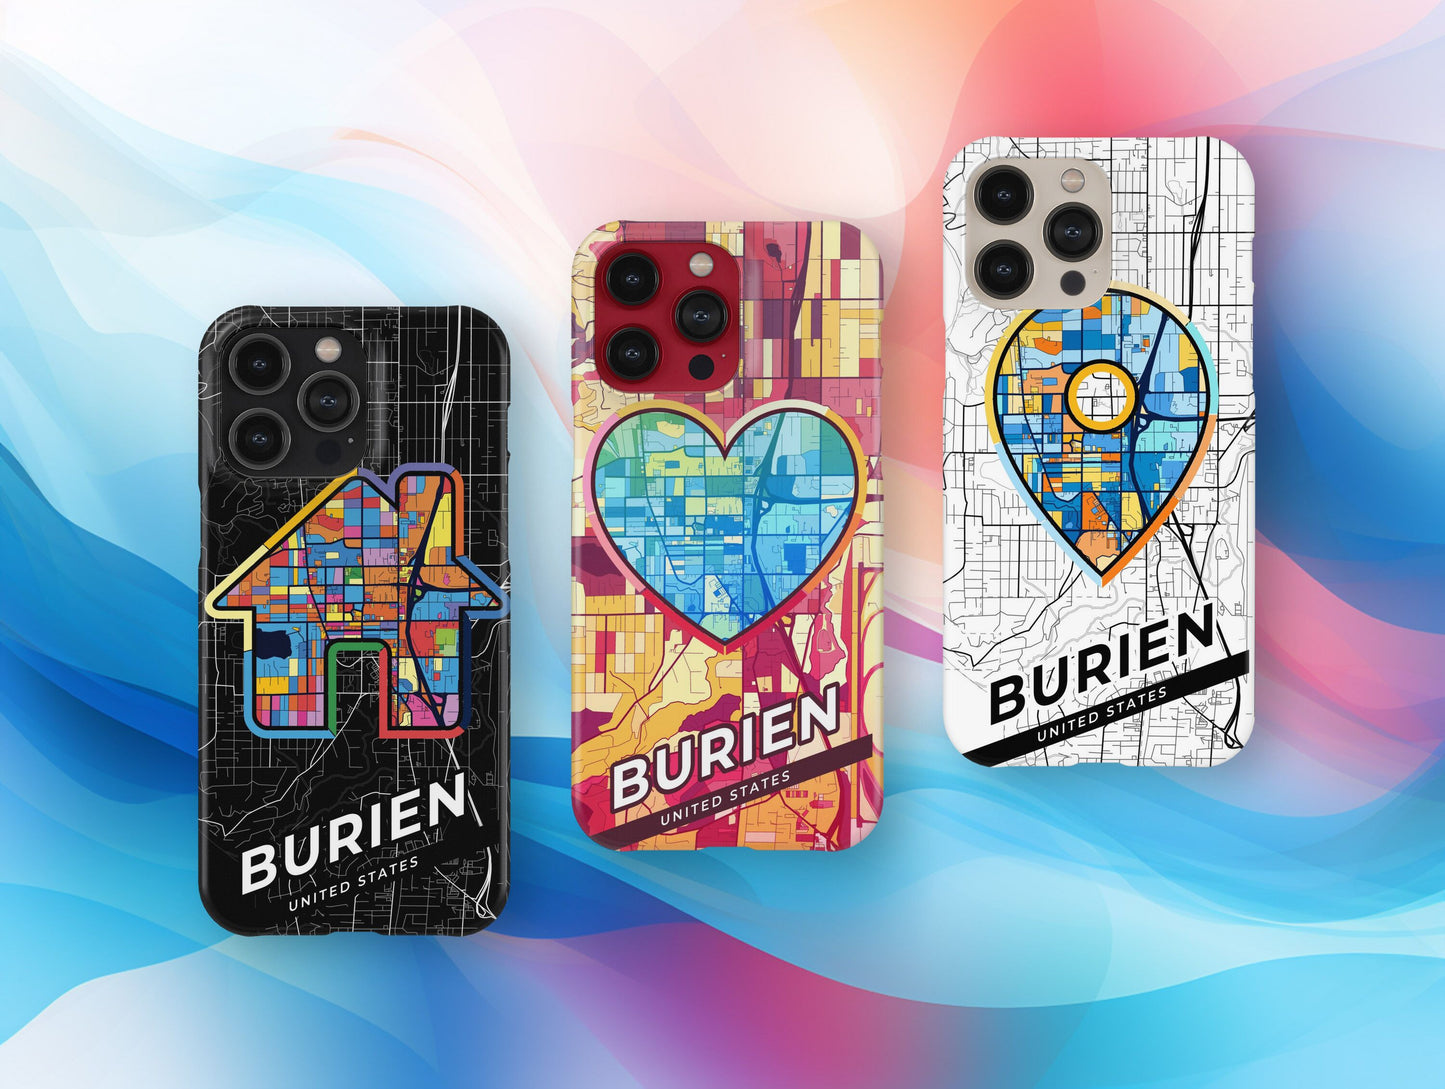 Burien Washington slim phone case with colorful icon. Birthday, wedding or housewarming gift. Couple match cases.